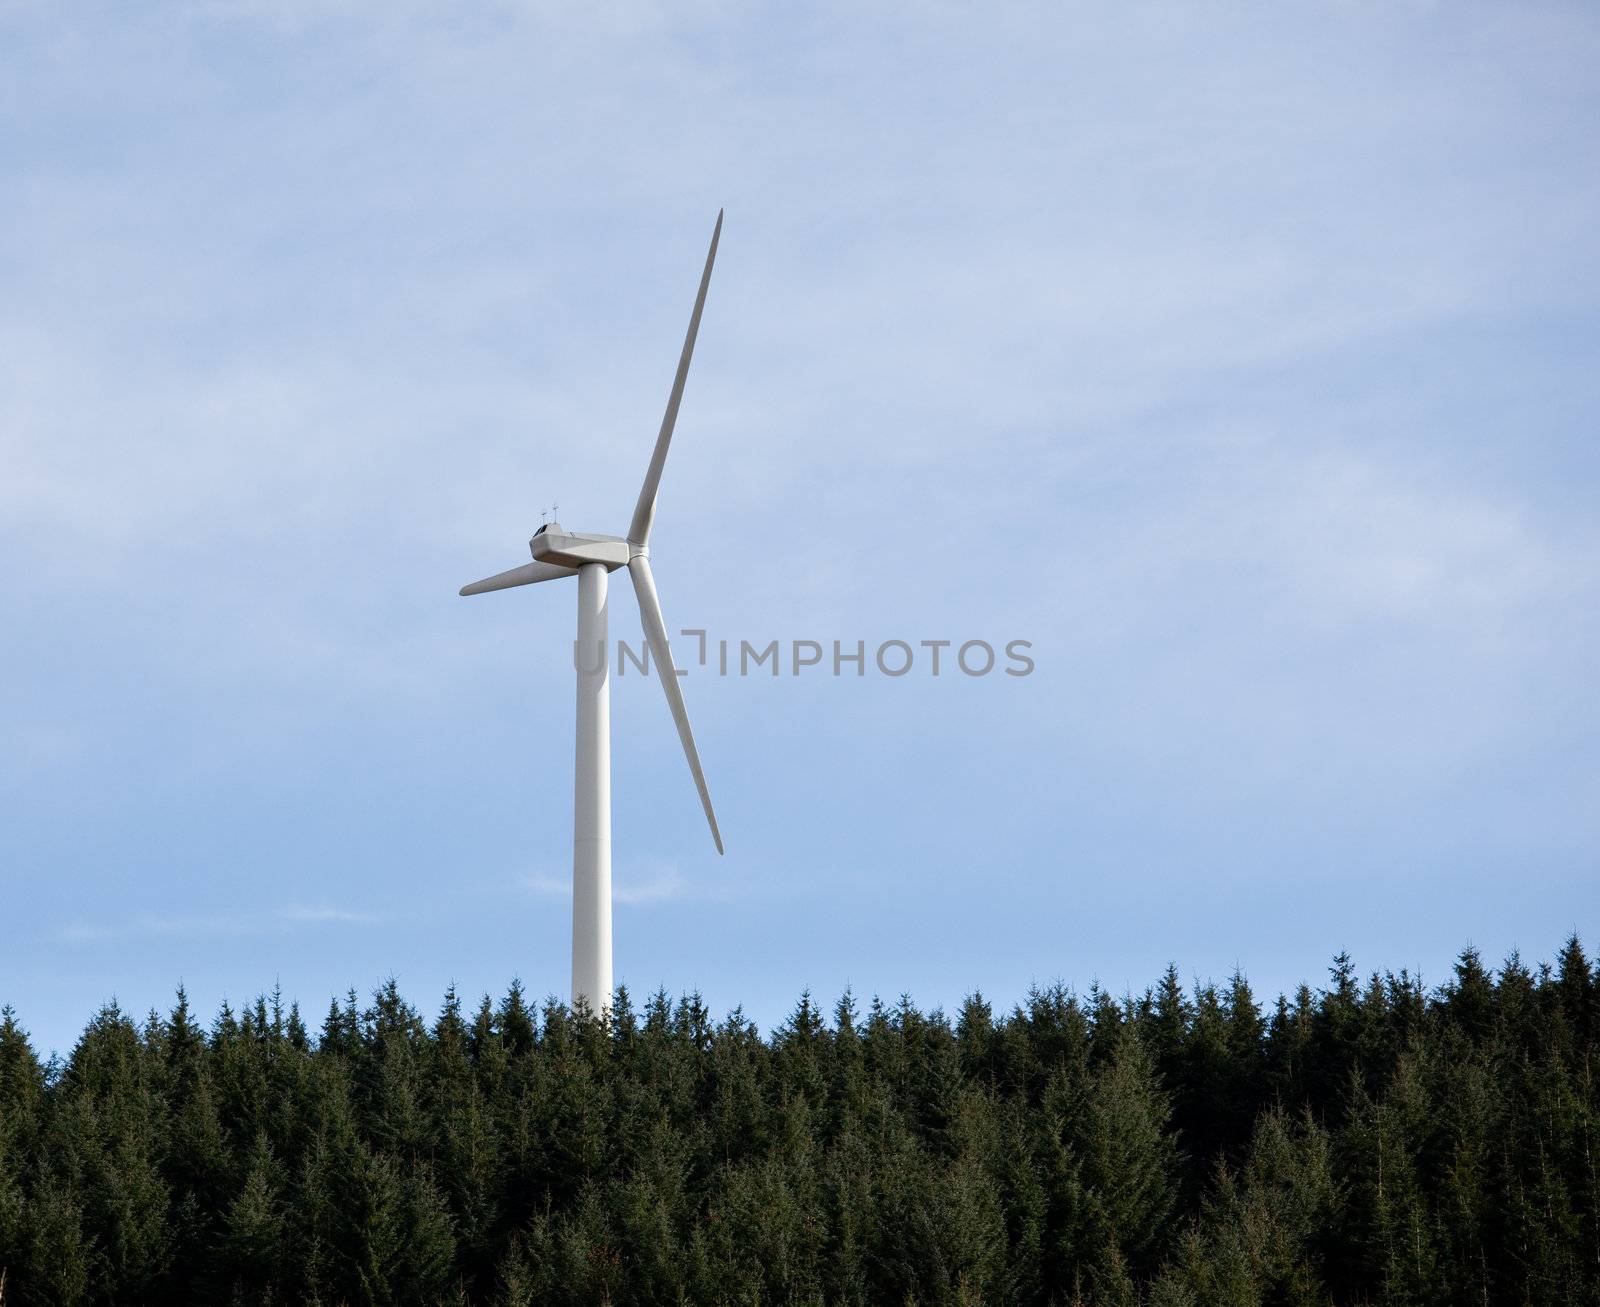 Large wind based electricity turbine rising above the tree line against a blue sky